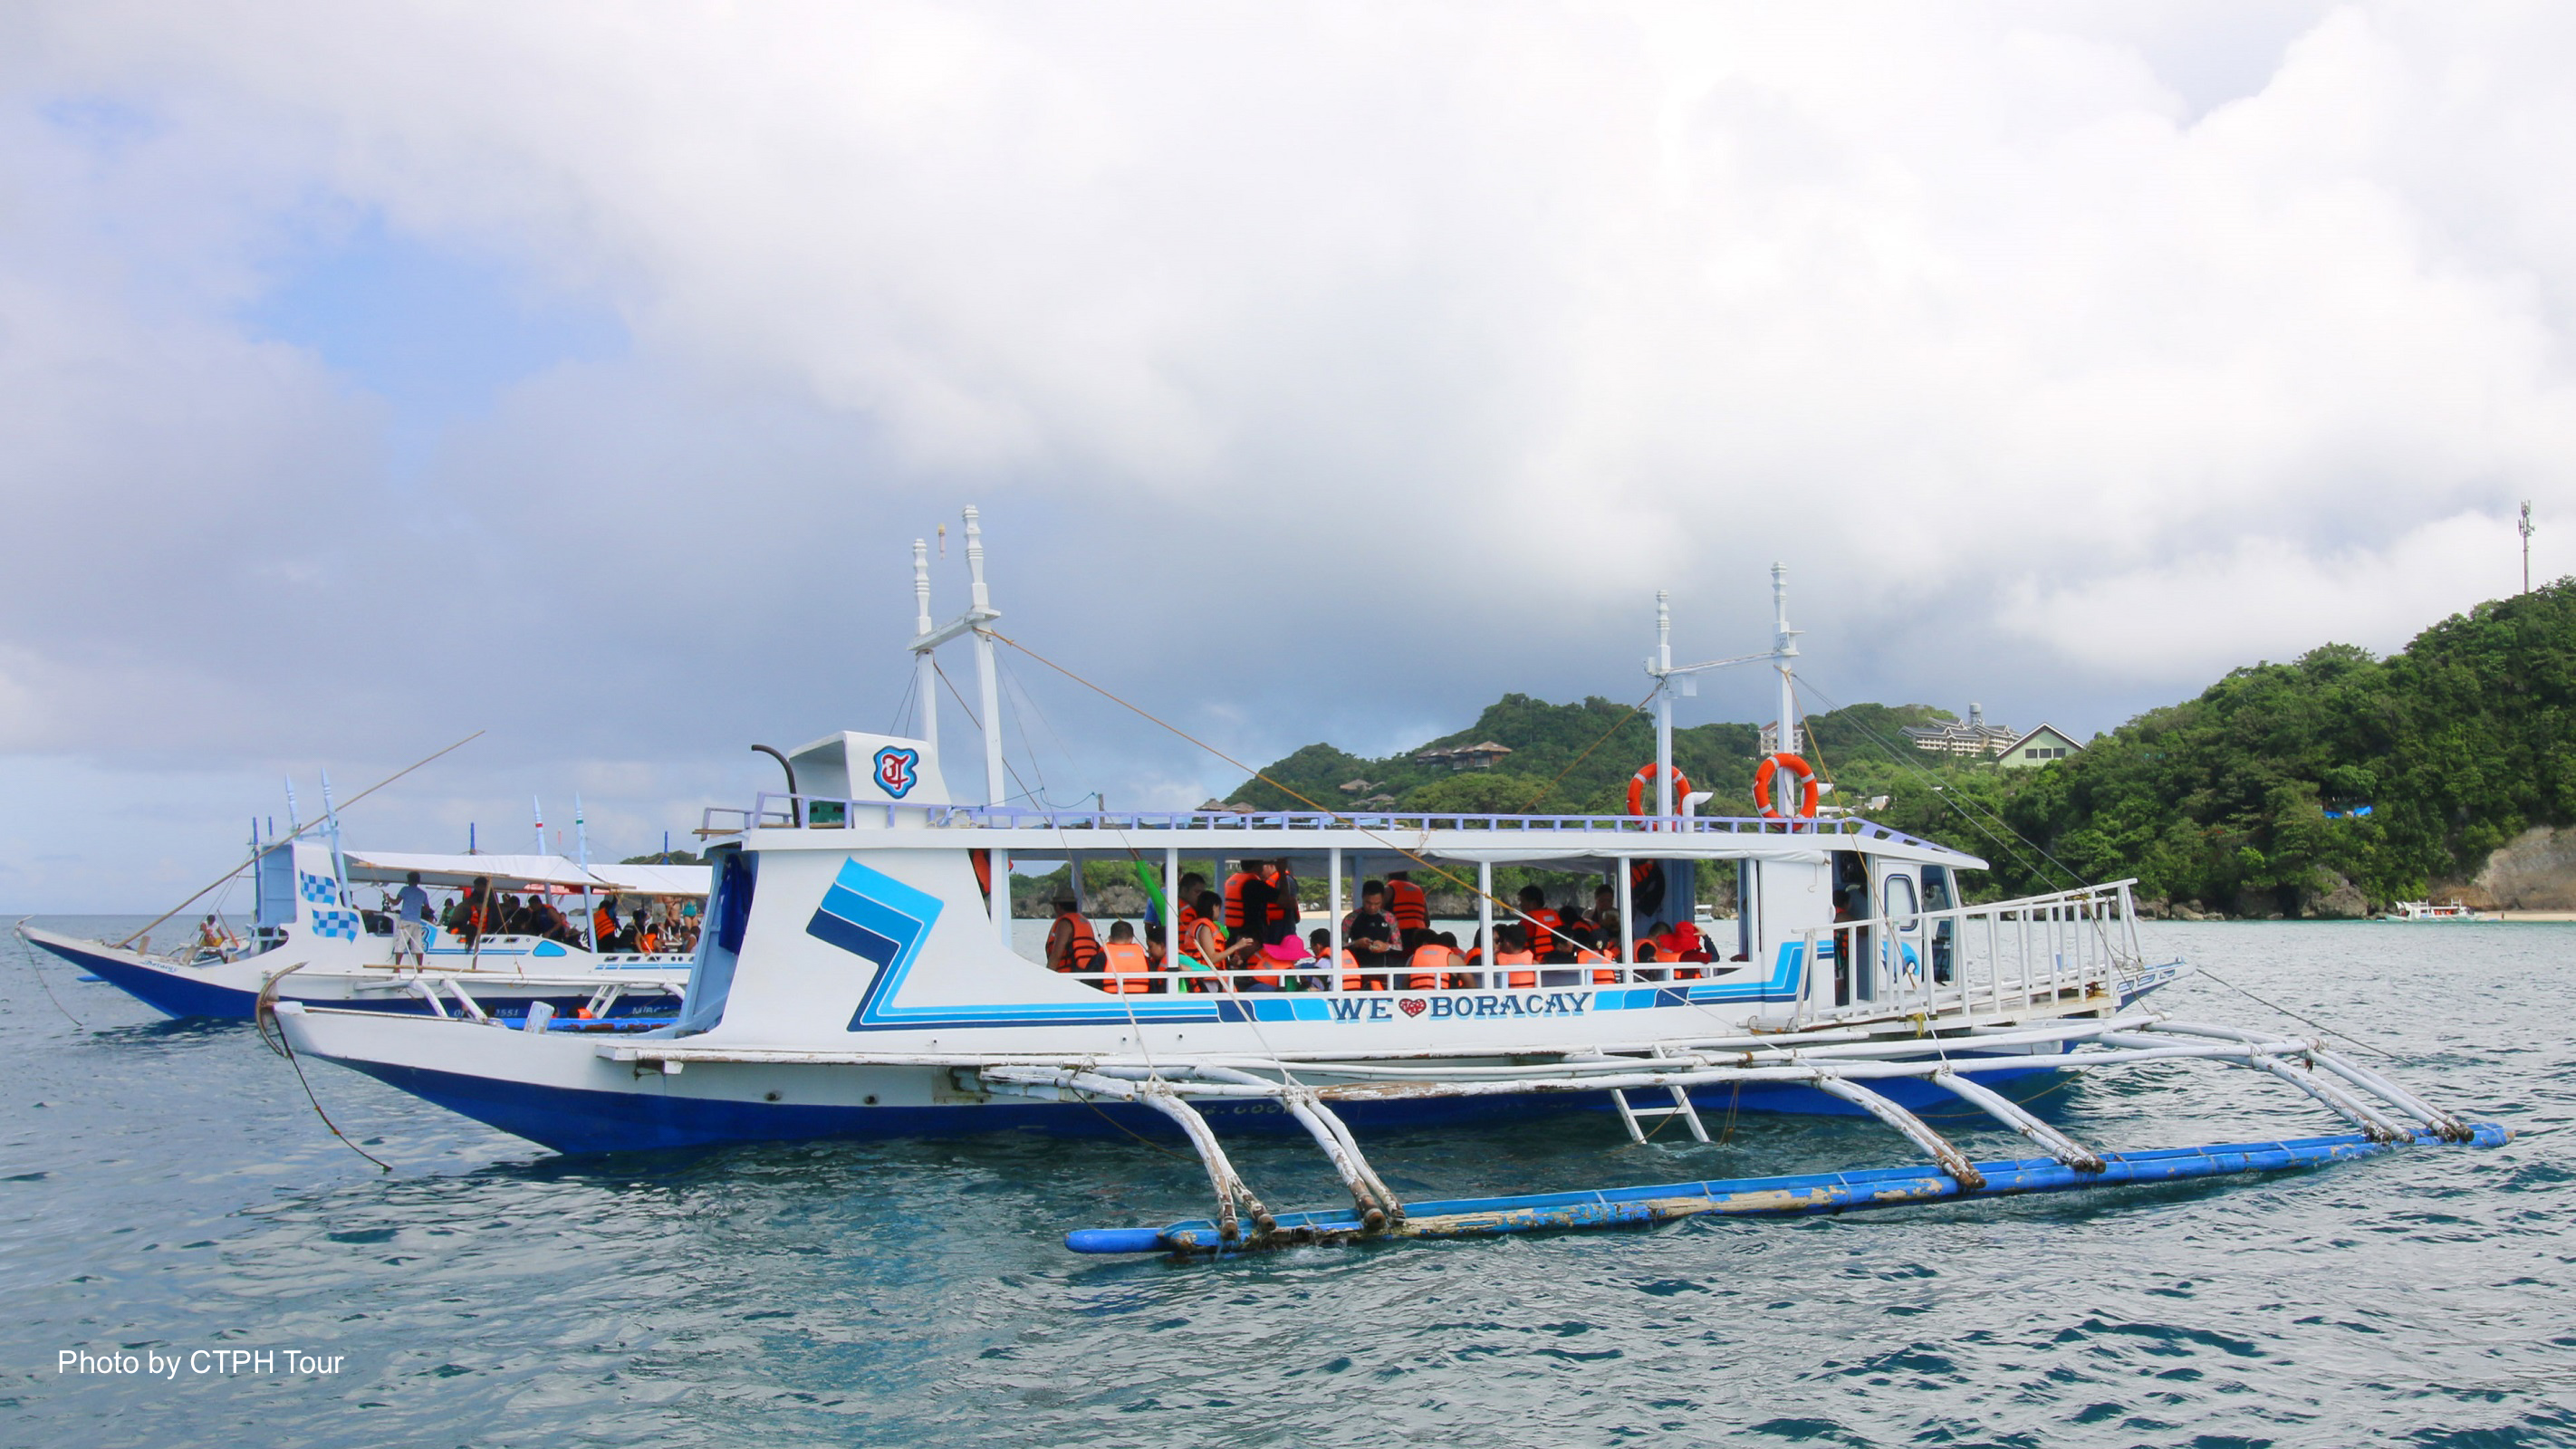 A Boat of tourists during the island hopping tour in Boracay